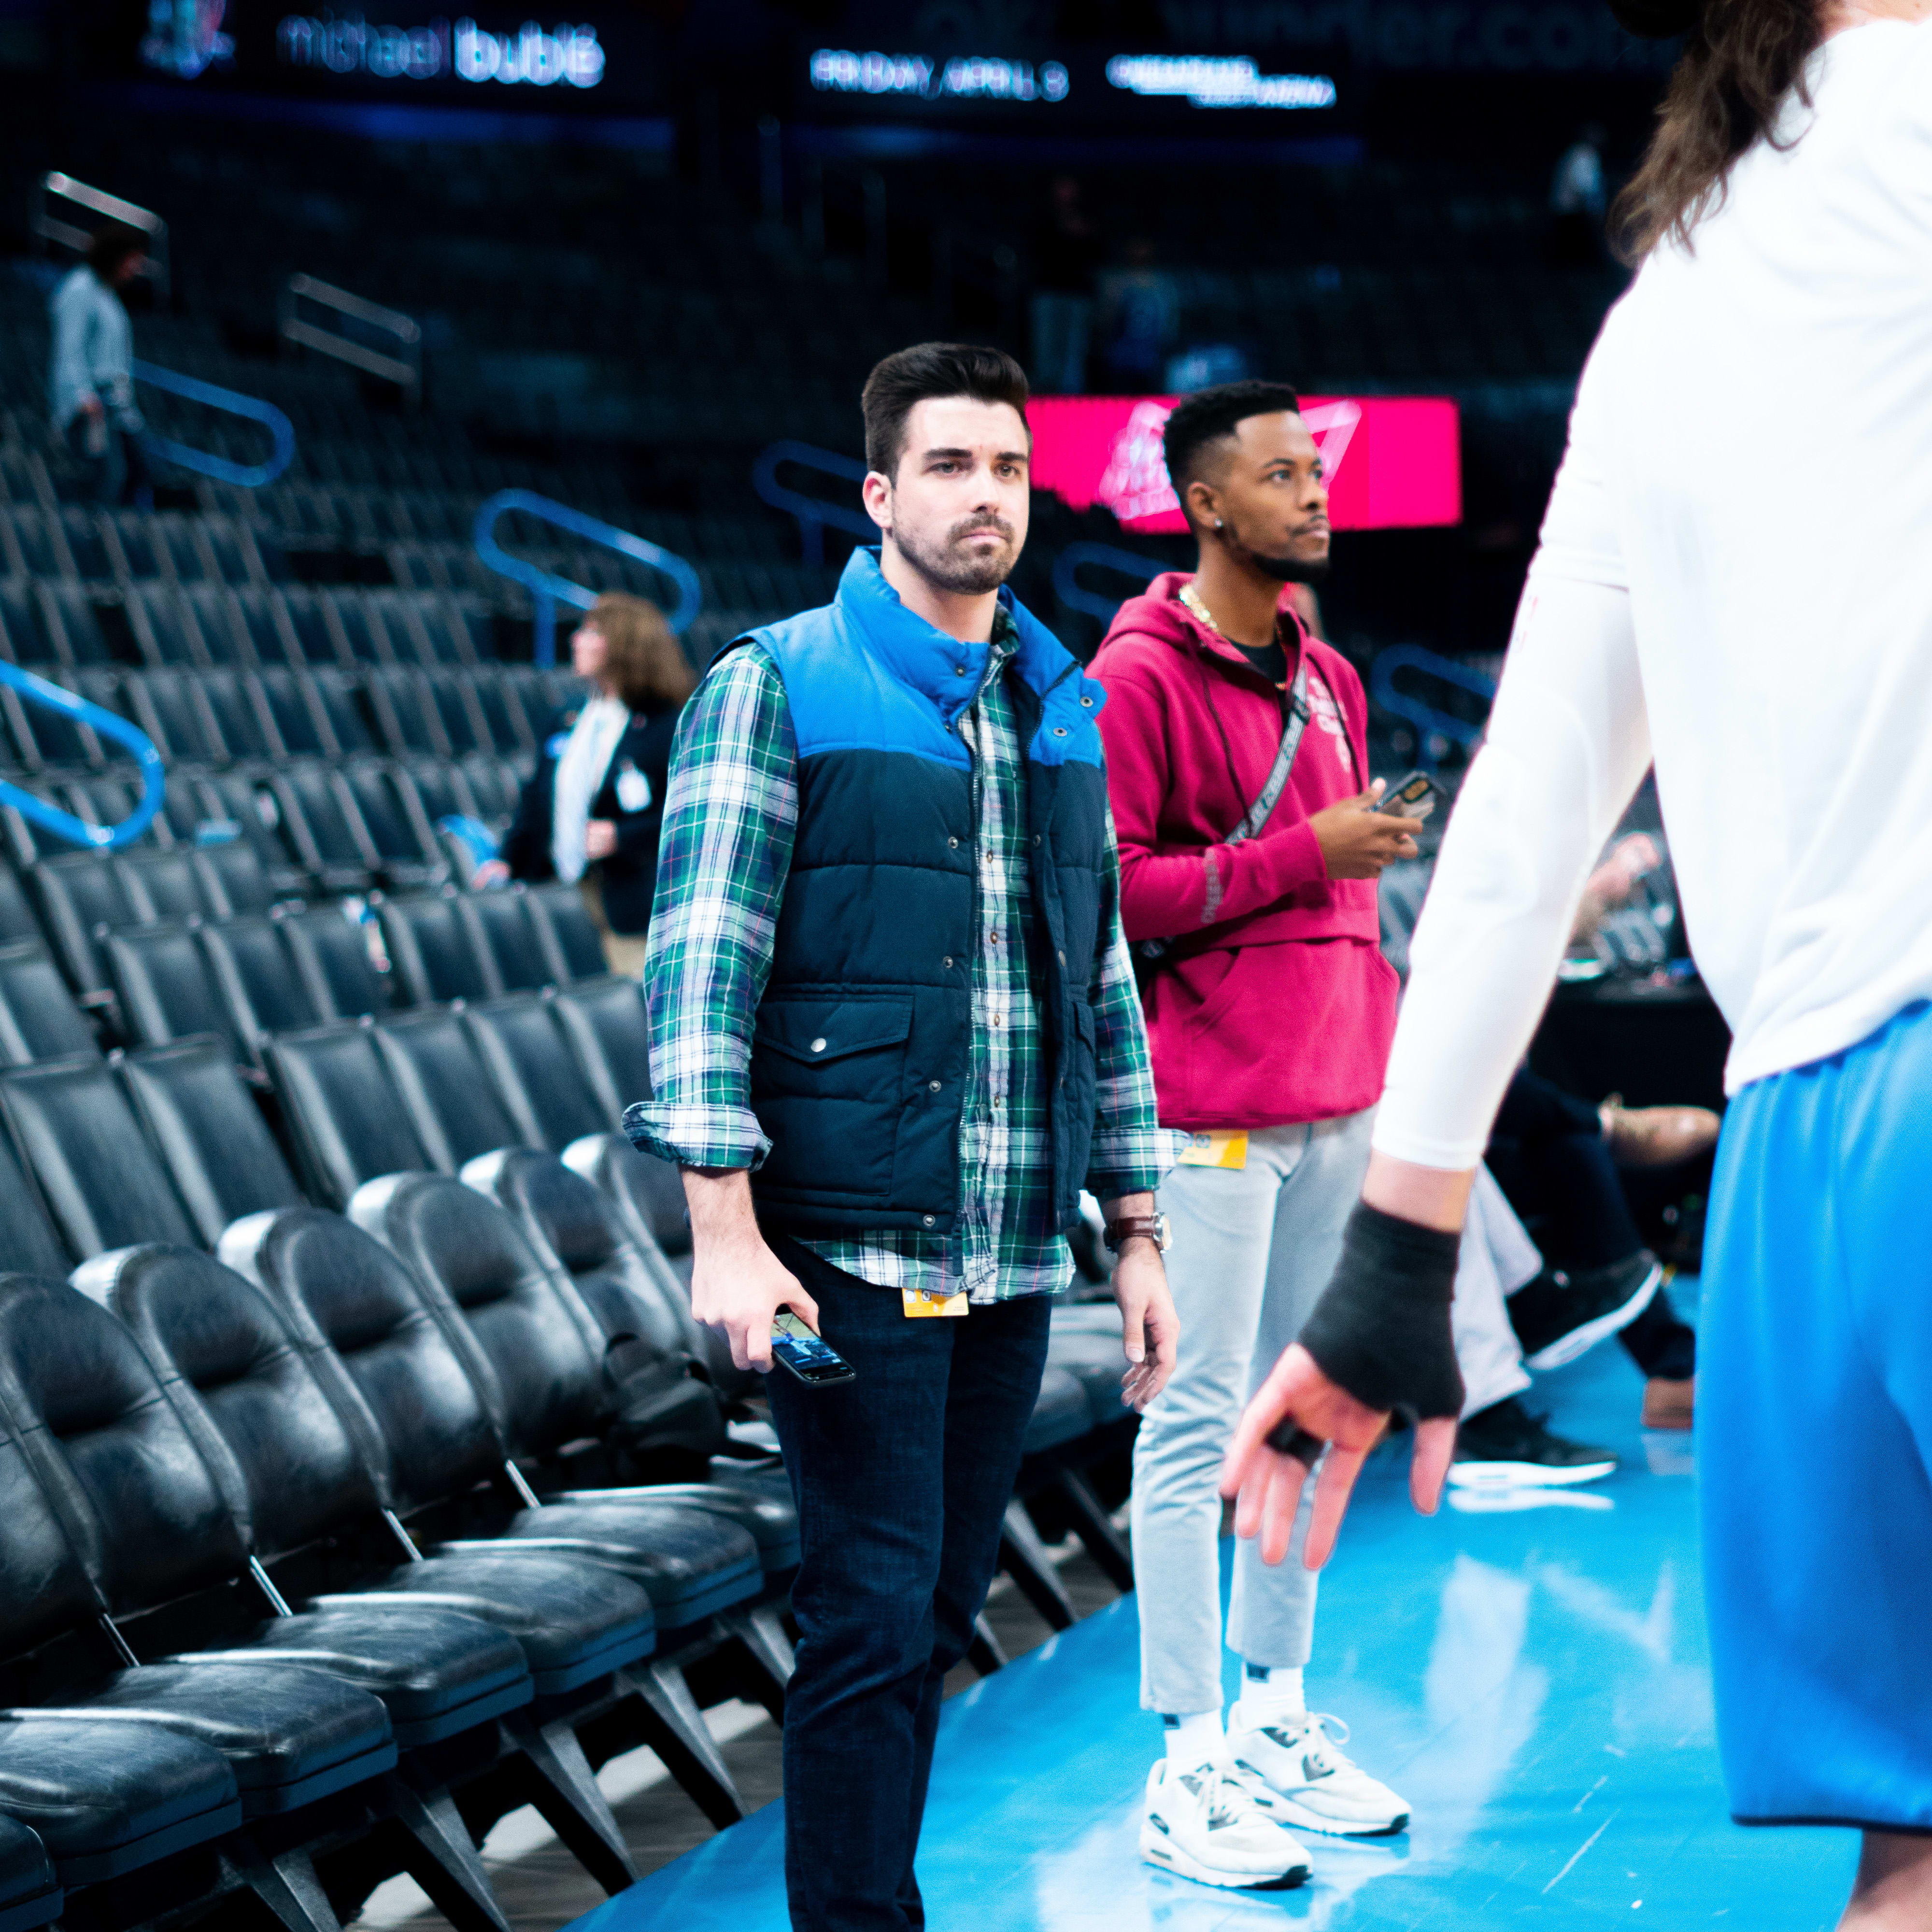 Thunder auctioning off Nick Collison's blood-stained shoes - NBC Sports